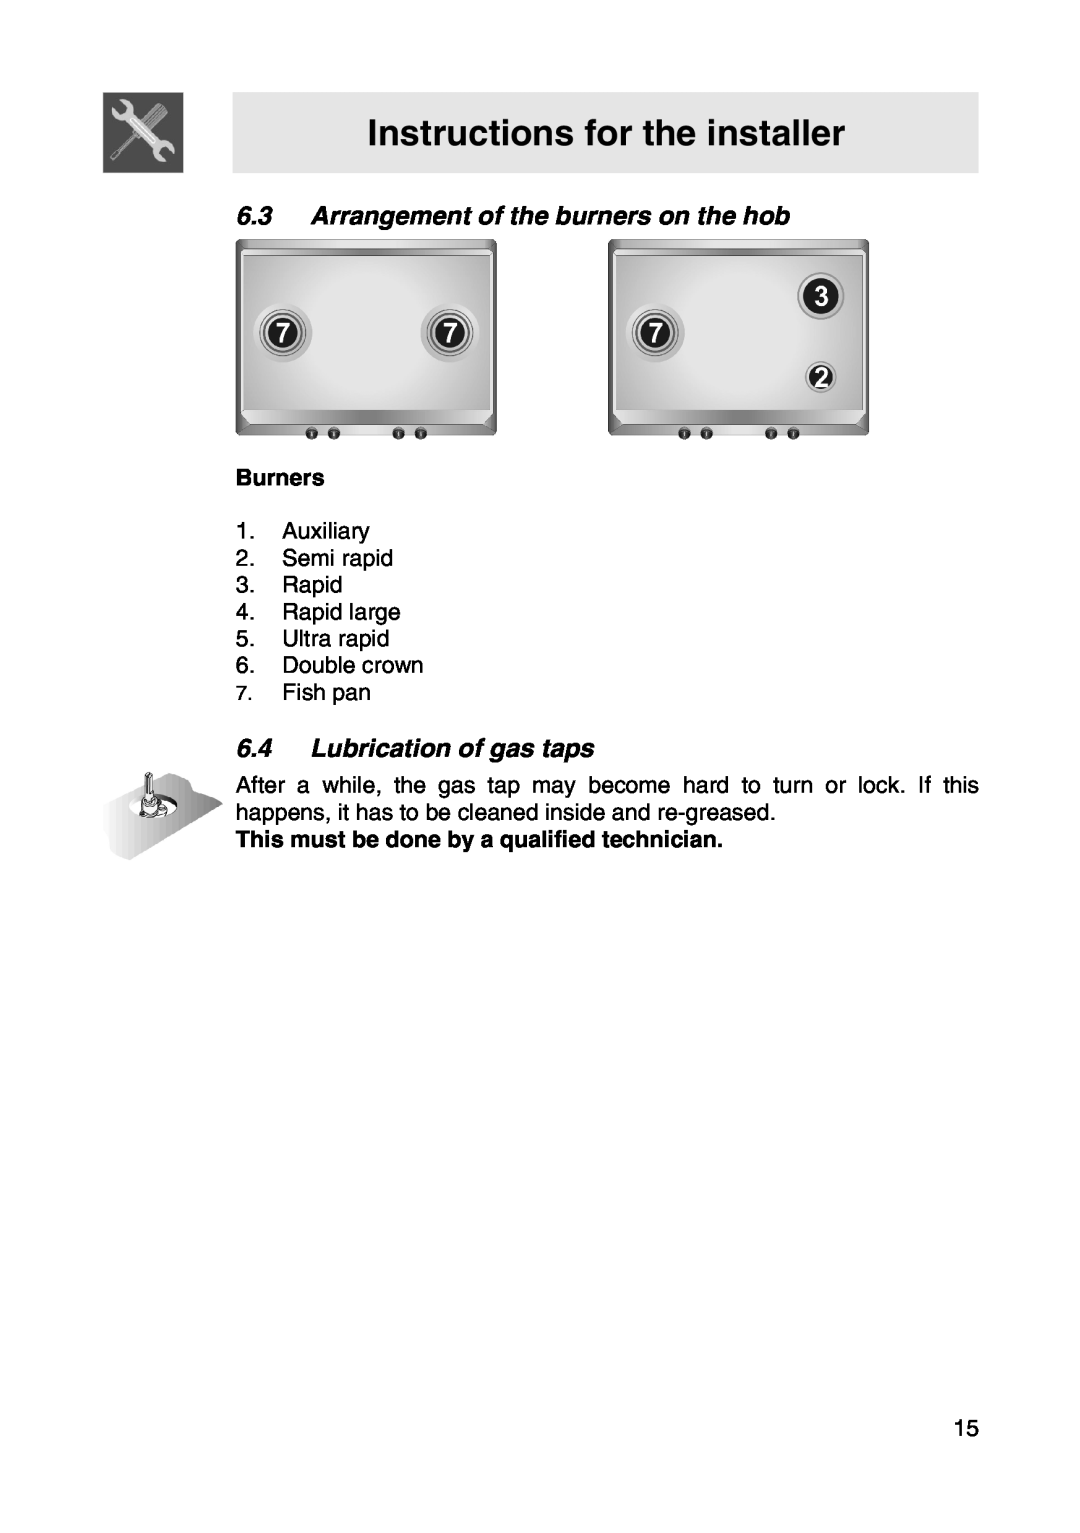 Smeg NCT685CHK manual 6.3Arrangement of the burners on the hob, 6.4Lubrication of gas taps, Instructions for the installer 